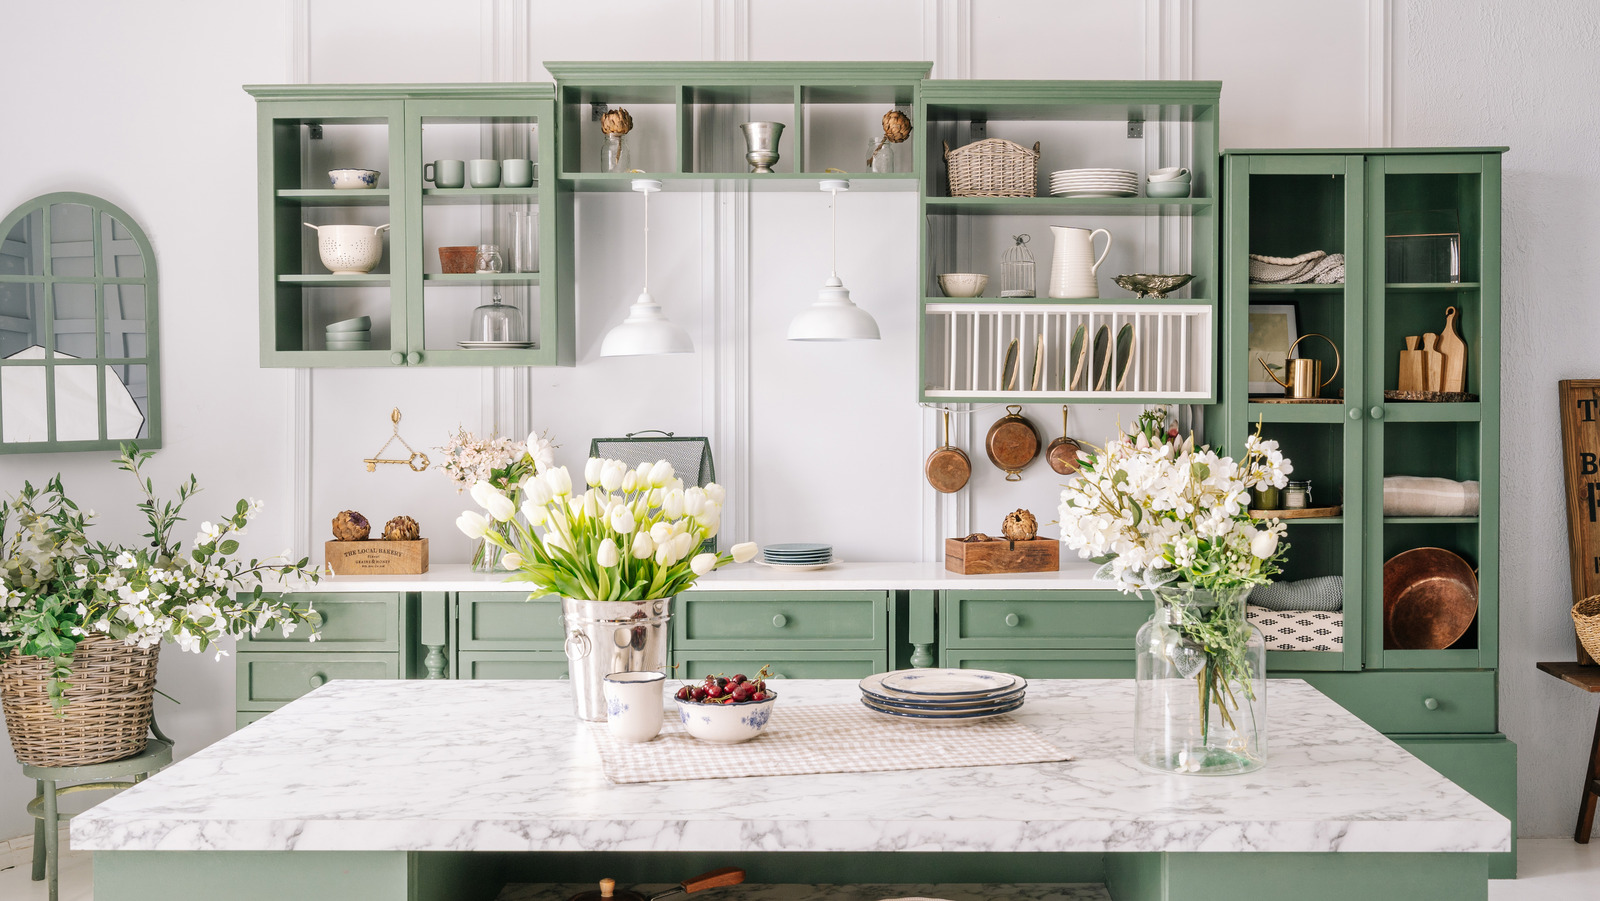 3 Things You Need To Stop Storing On Your Kitchen Counters